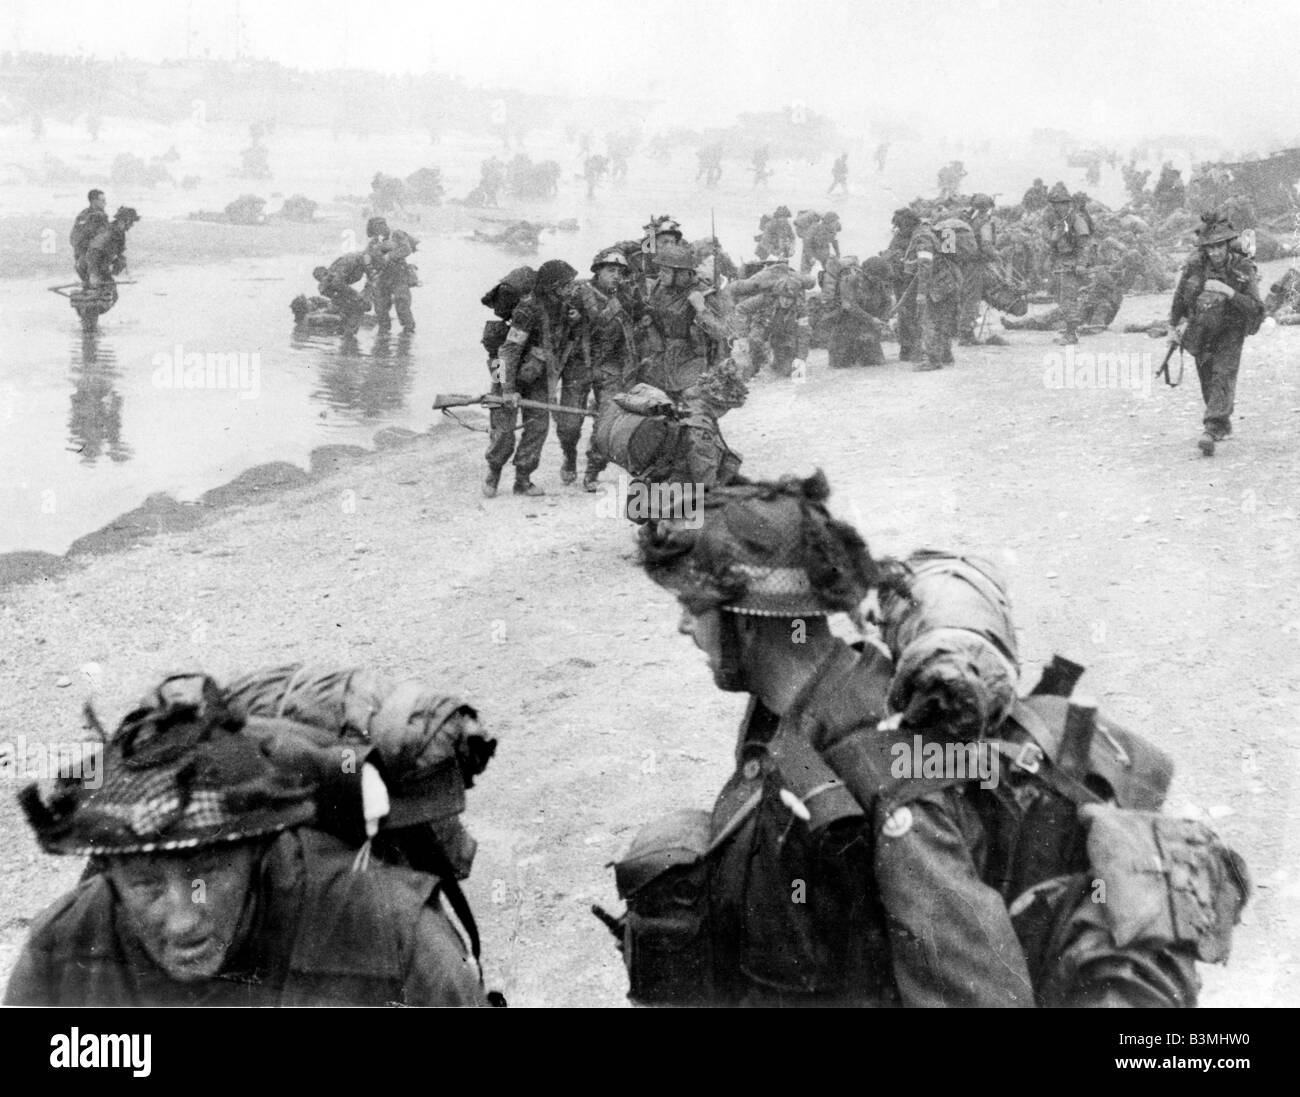 D-DAY 6 June 1944. British soldiers  struggle ashore on SWORD  beach in Normandy- see Description below for details Stock Photo